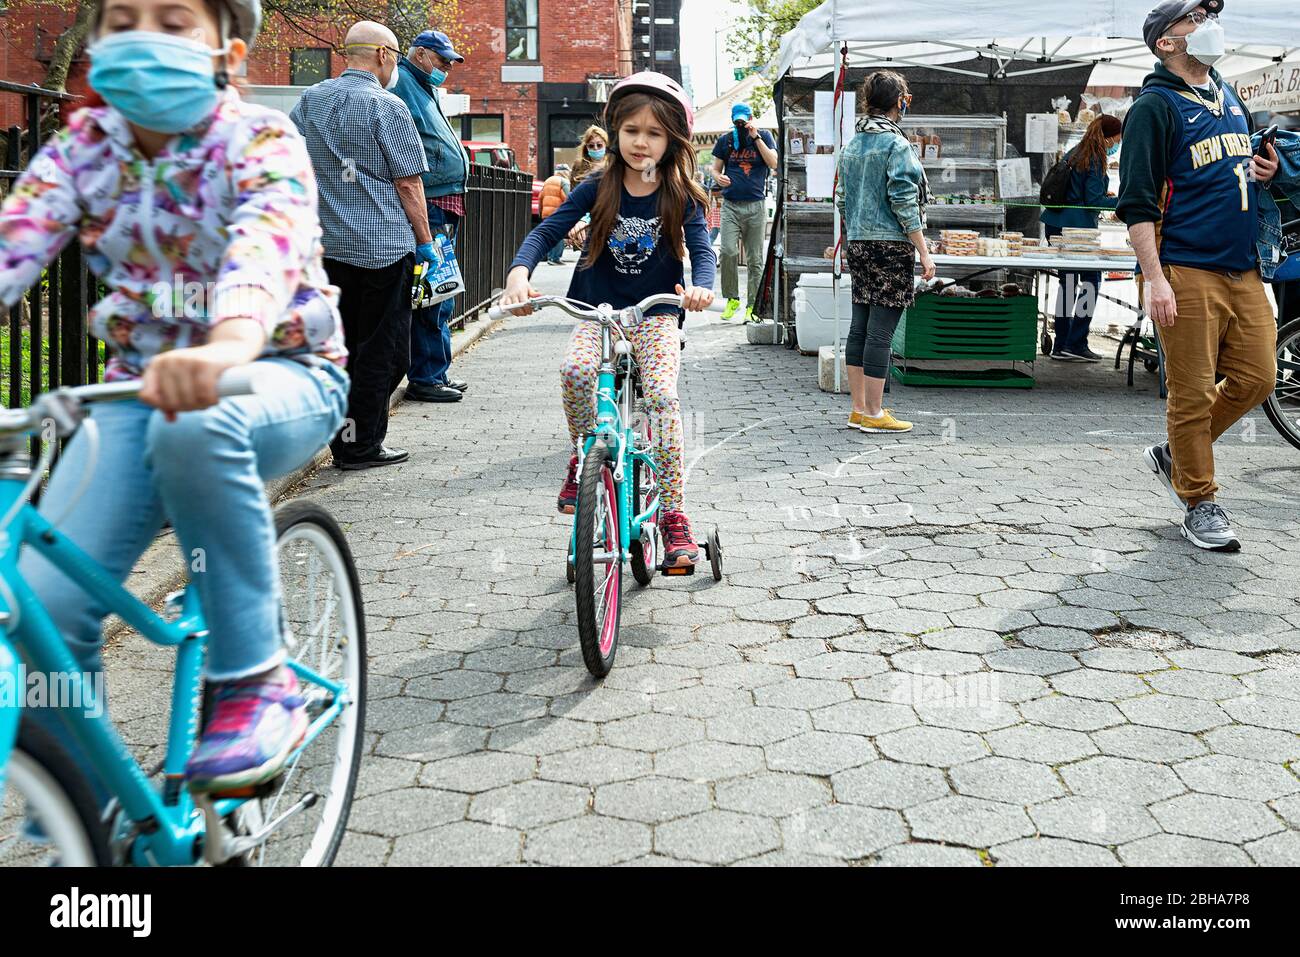 Kids riding bicycles through a farmers market in New York City during the COVID 19 pandemic in New York City in April 2020 Stock Photo